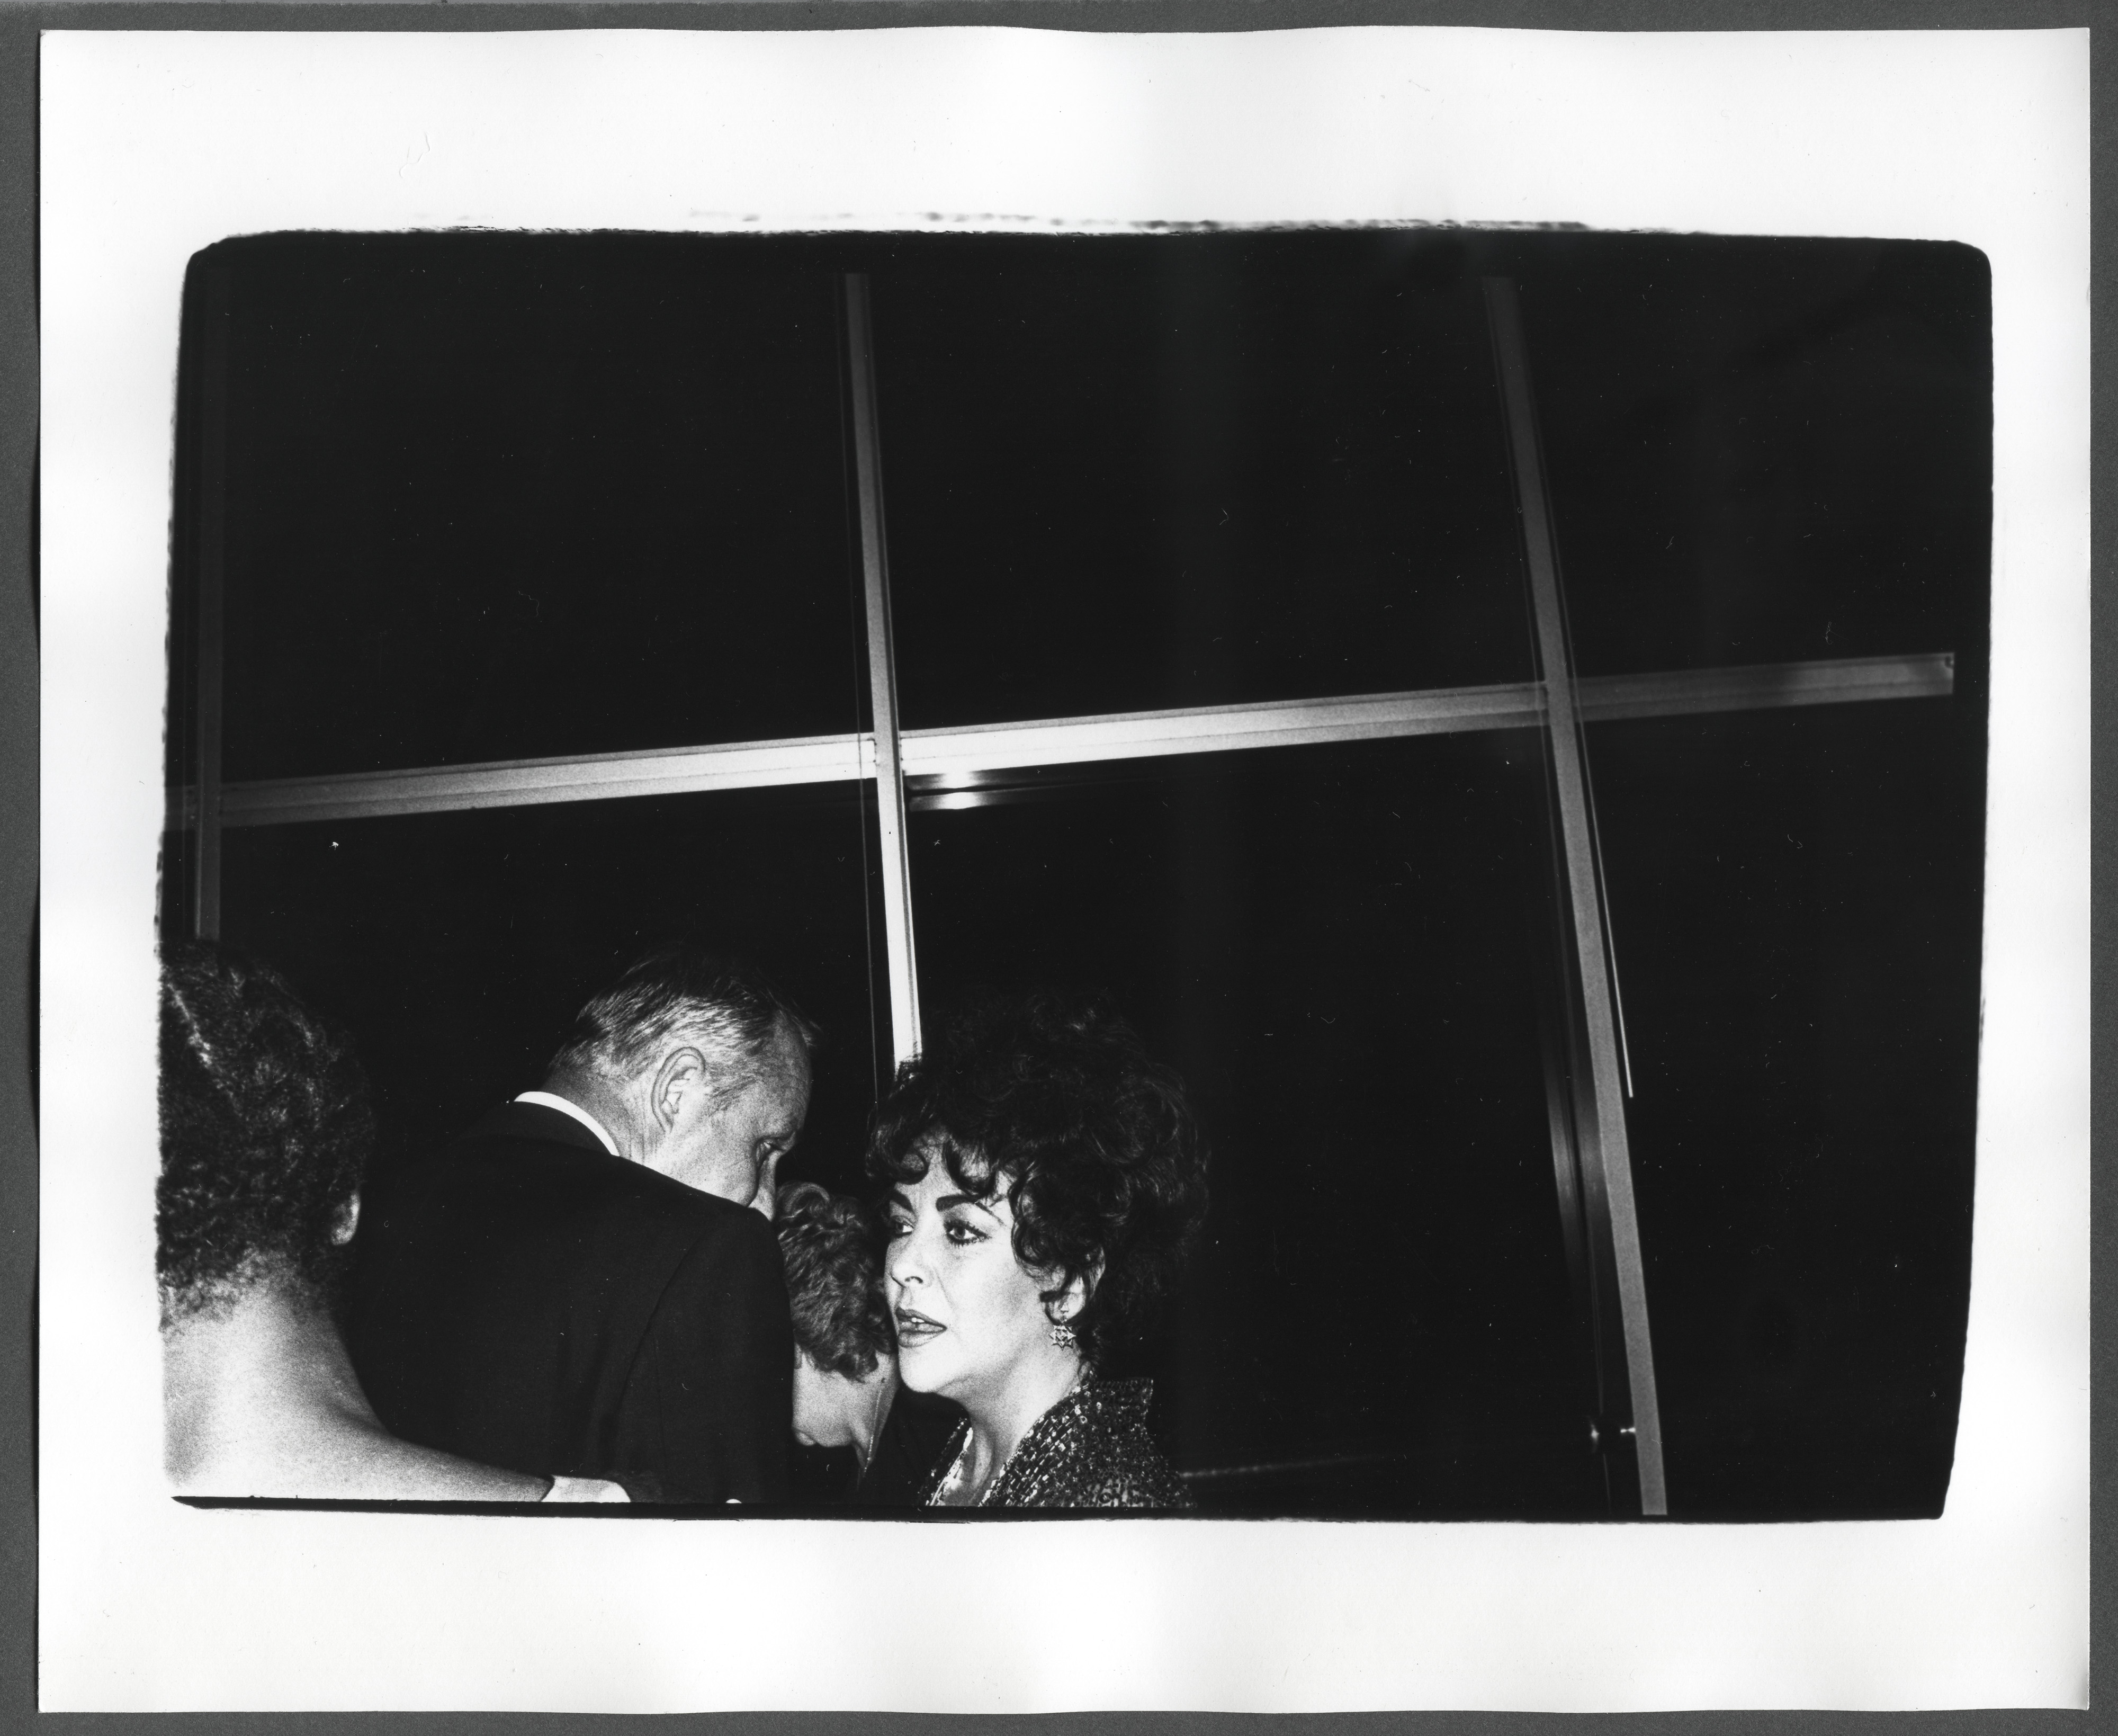 Andy Warhol, Elizabeth Taylor, 1979. Gift of the Andy Warhol Foundation for the Visual Arts, Inc.